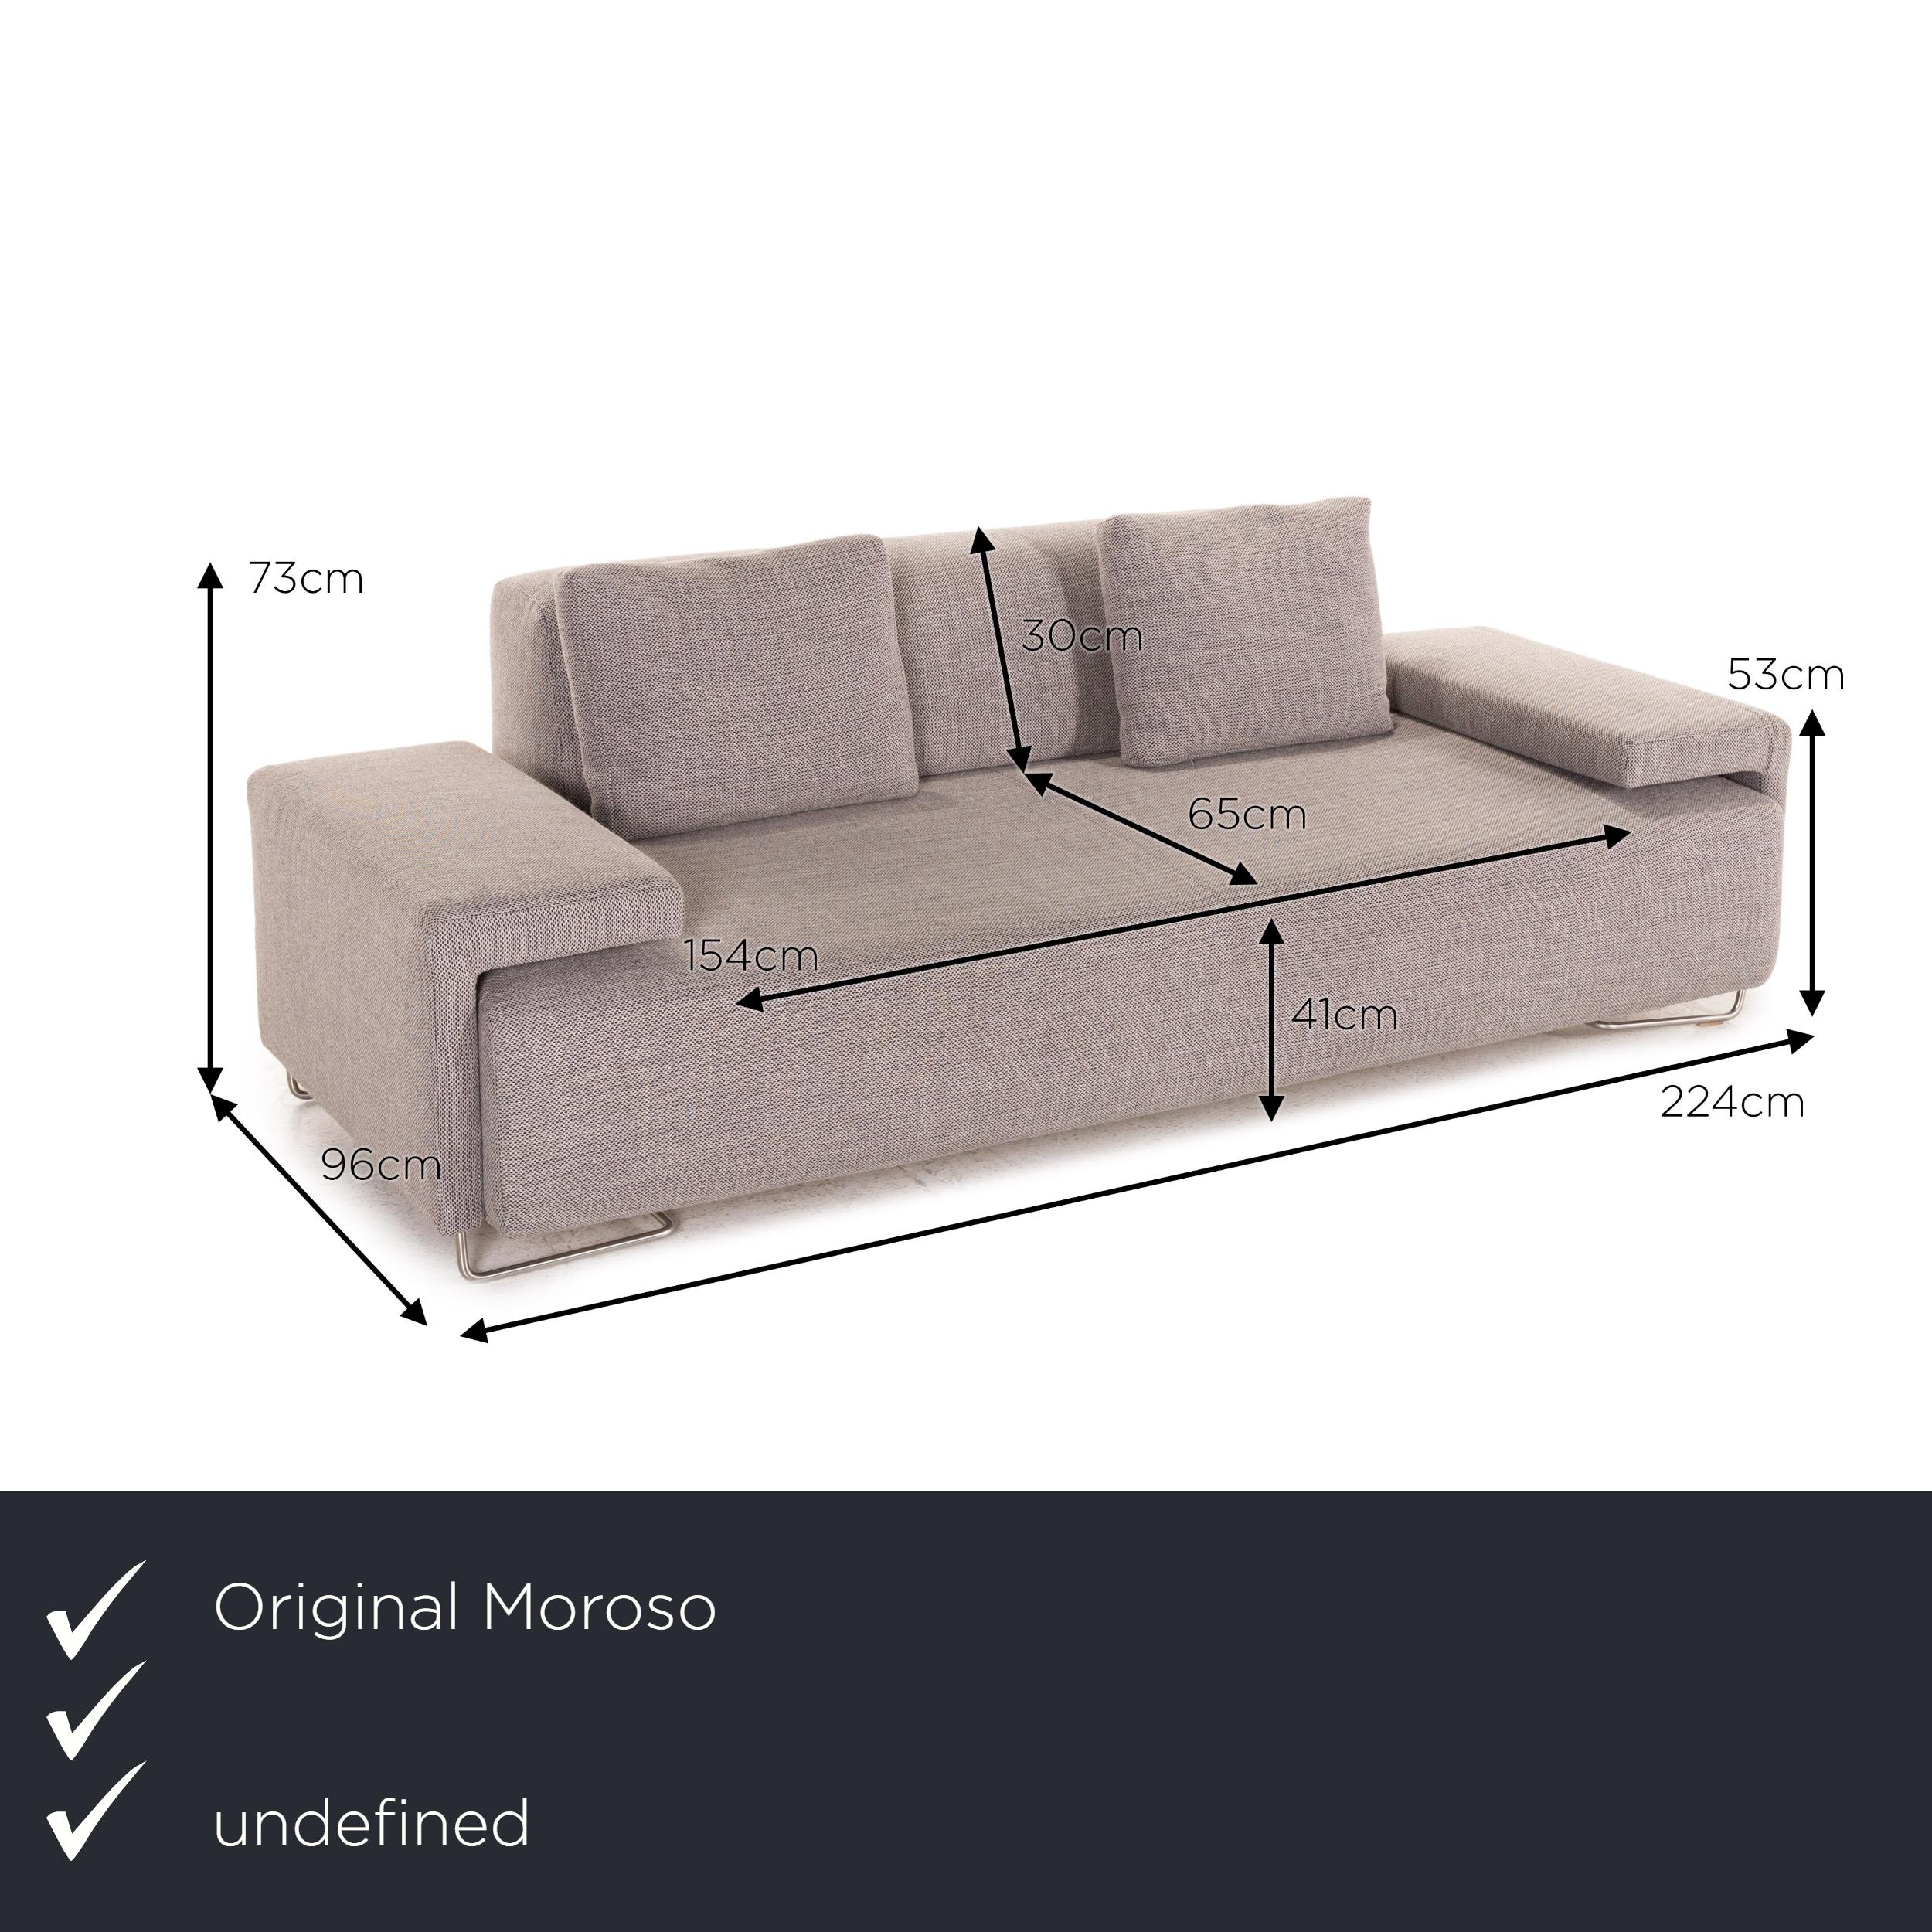 We present to you a Moroso Lowland fabric sofa set gray 2x three-seater set.

Product measurements in centimeters:

depth: 96
width: 224
height: 73
seat height: 41
rest height: 53
seat depth: 65
seat width: 154
back height: 30.

 